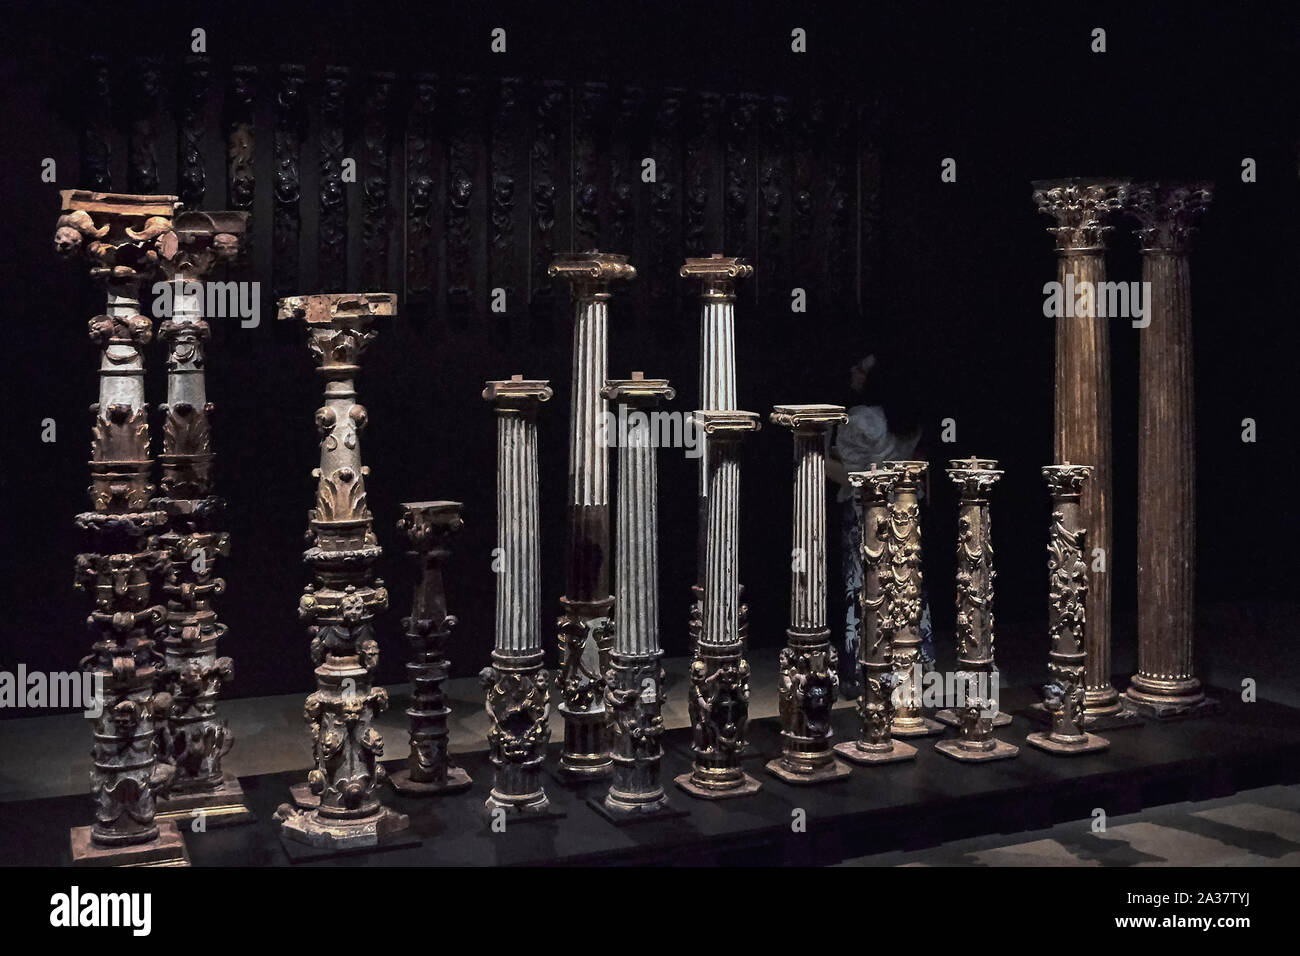 Exhibition Almacen, Columns and Balusters 16th, 17th, 18th century in the National Sculpture Museum, Palacio de Villena, of the city Valladolid, Spain Stock Photo